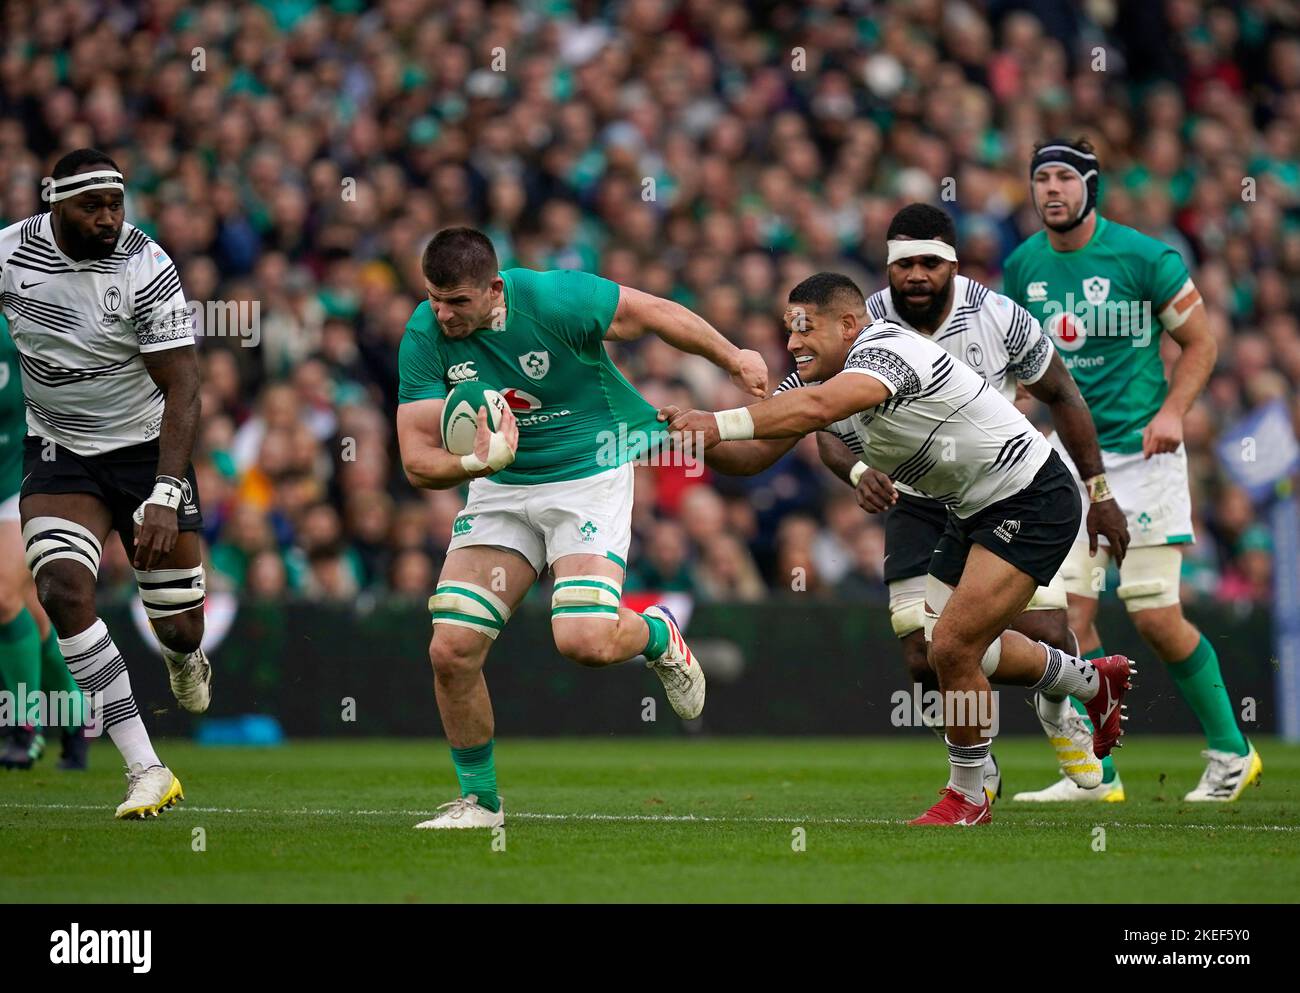 Ireland's Nick Timoney is pulled back by Fiji's Sam Matavesi (right) as he runs with the ball during the Autumn International match at the Aviva Stadium in Dublin, Ireland. Picture date: Saturday November 12, 2022. Stock Photo